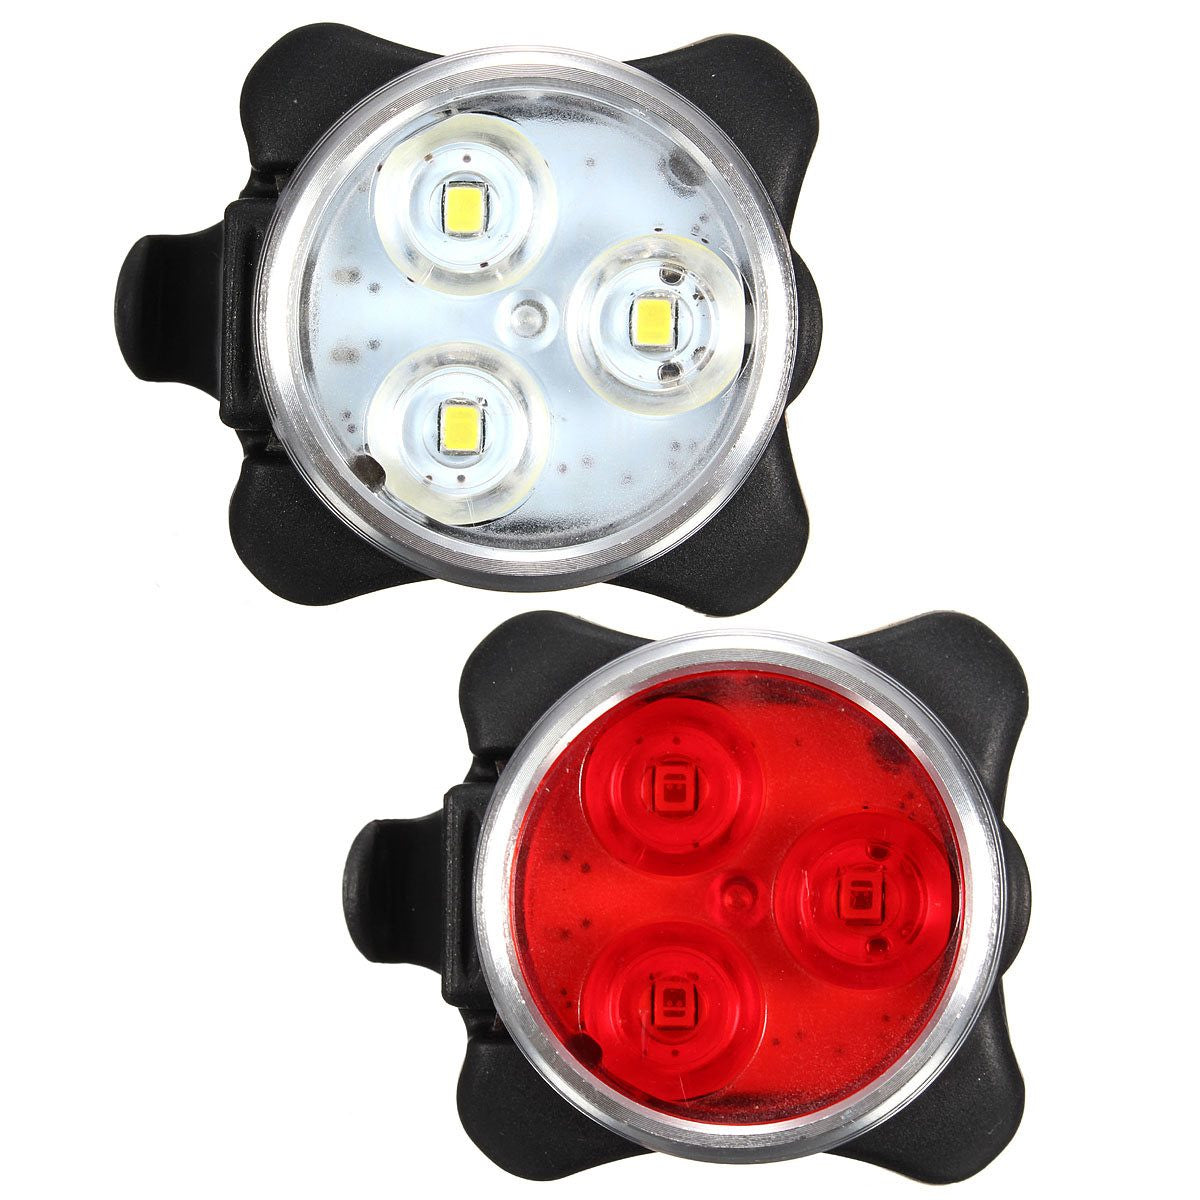 USB Rechargeable Cycling Bicycle Bike 3LED Head Front Rear Tail Clip Light Lamp - Shopy Max